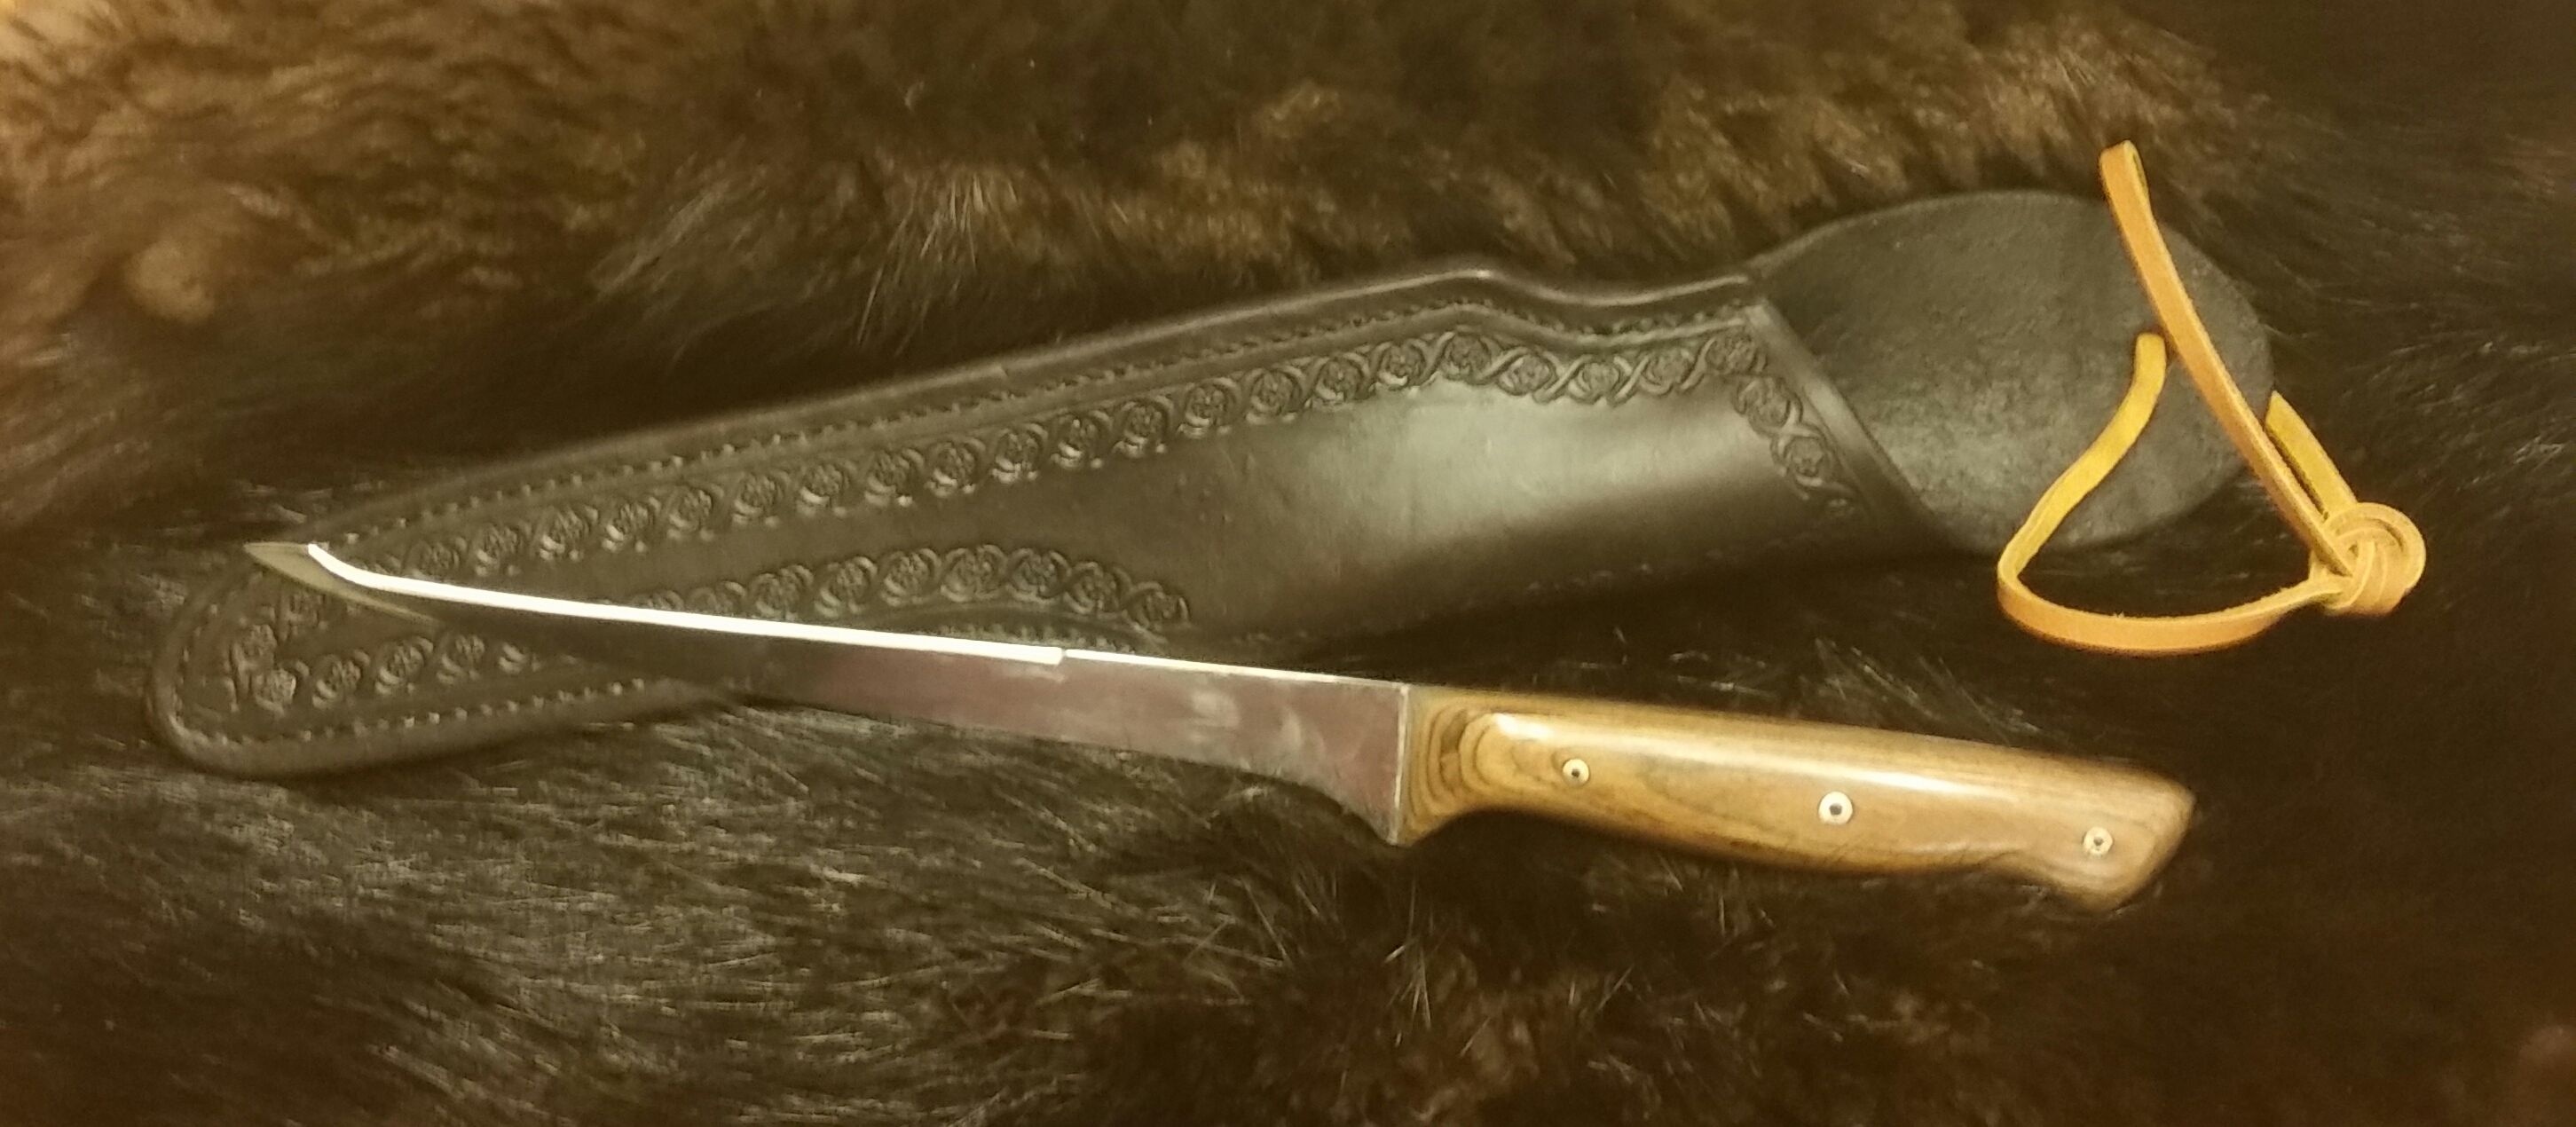 Double Edge Filet Knife with Hand Tooled, Hand Stitched Leather Sheath...  $110.00 